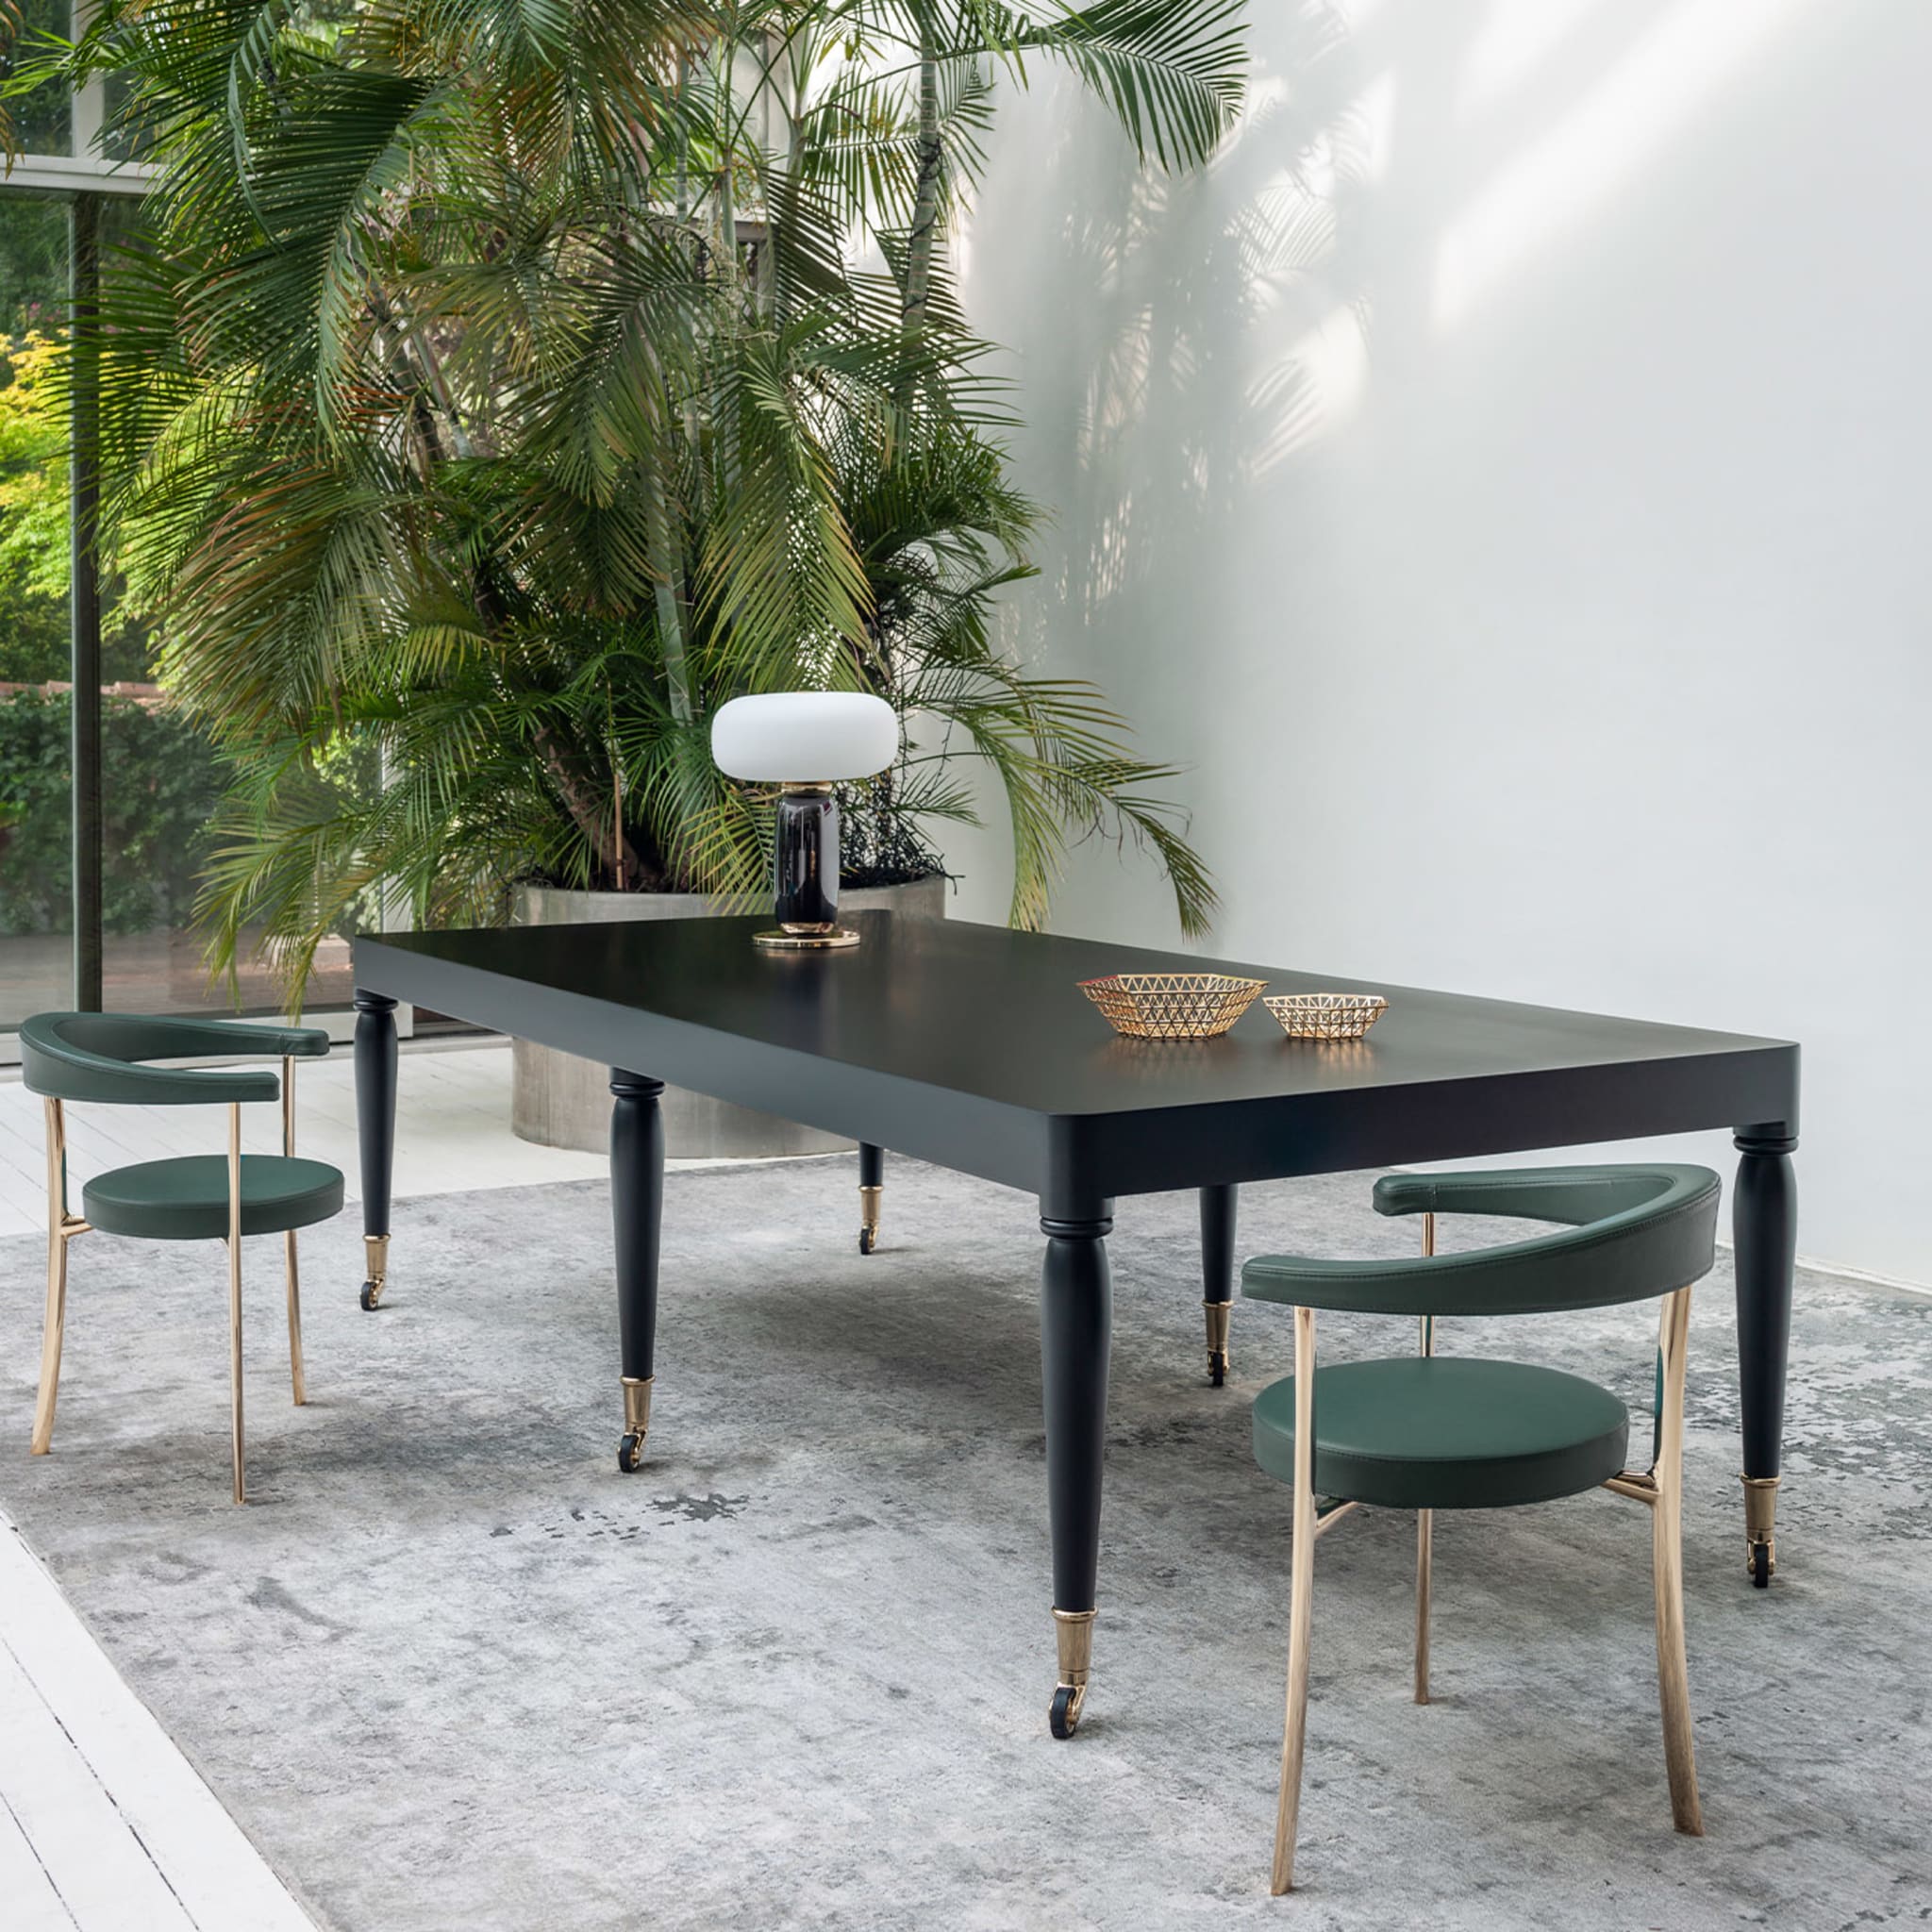 Shaker Black Dining Table by Stefano Giovannoni - Alternative view 2